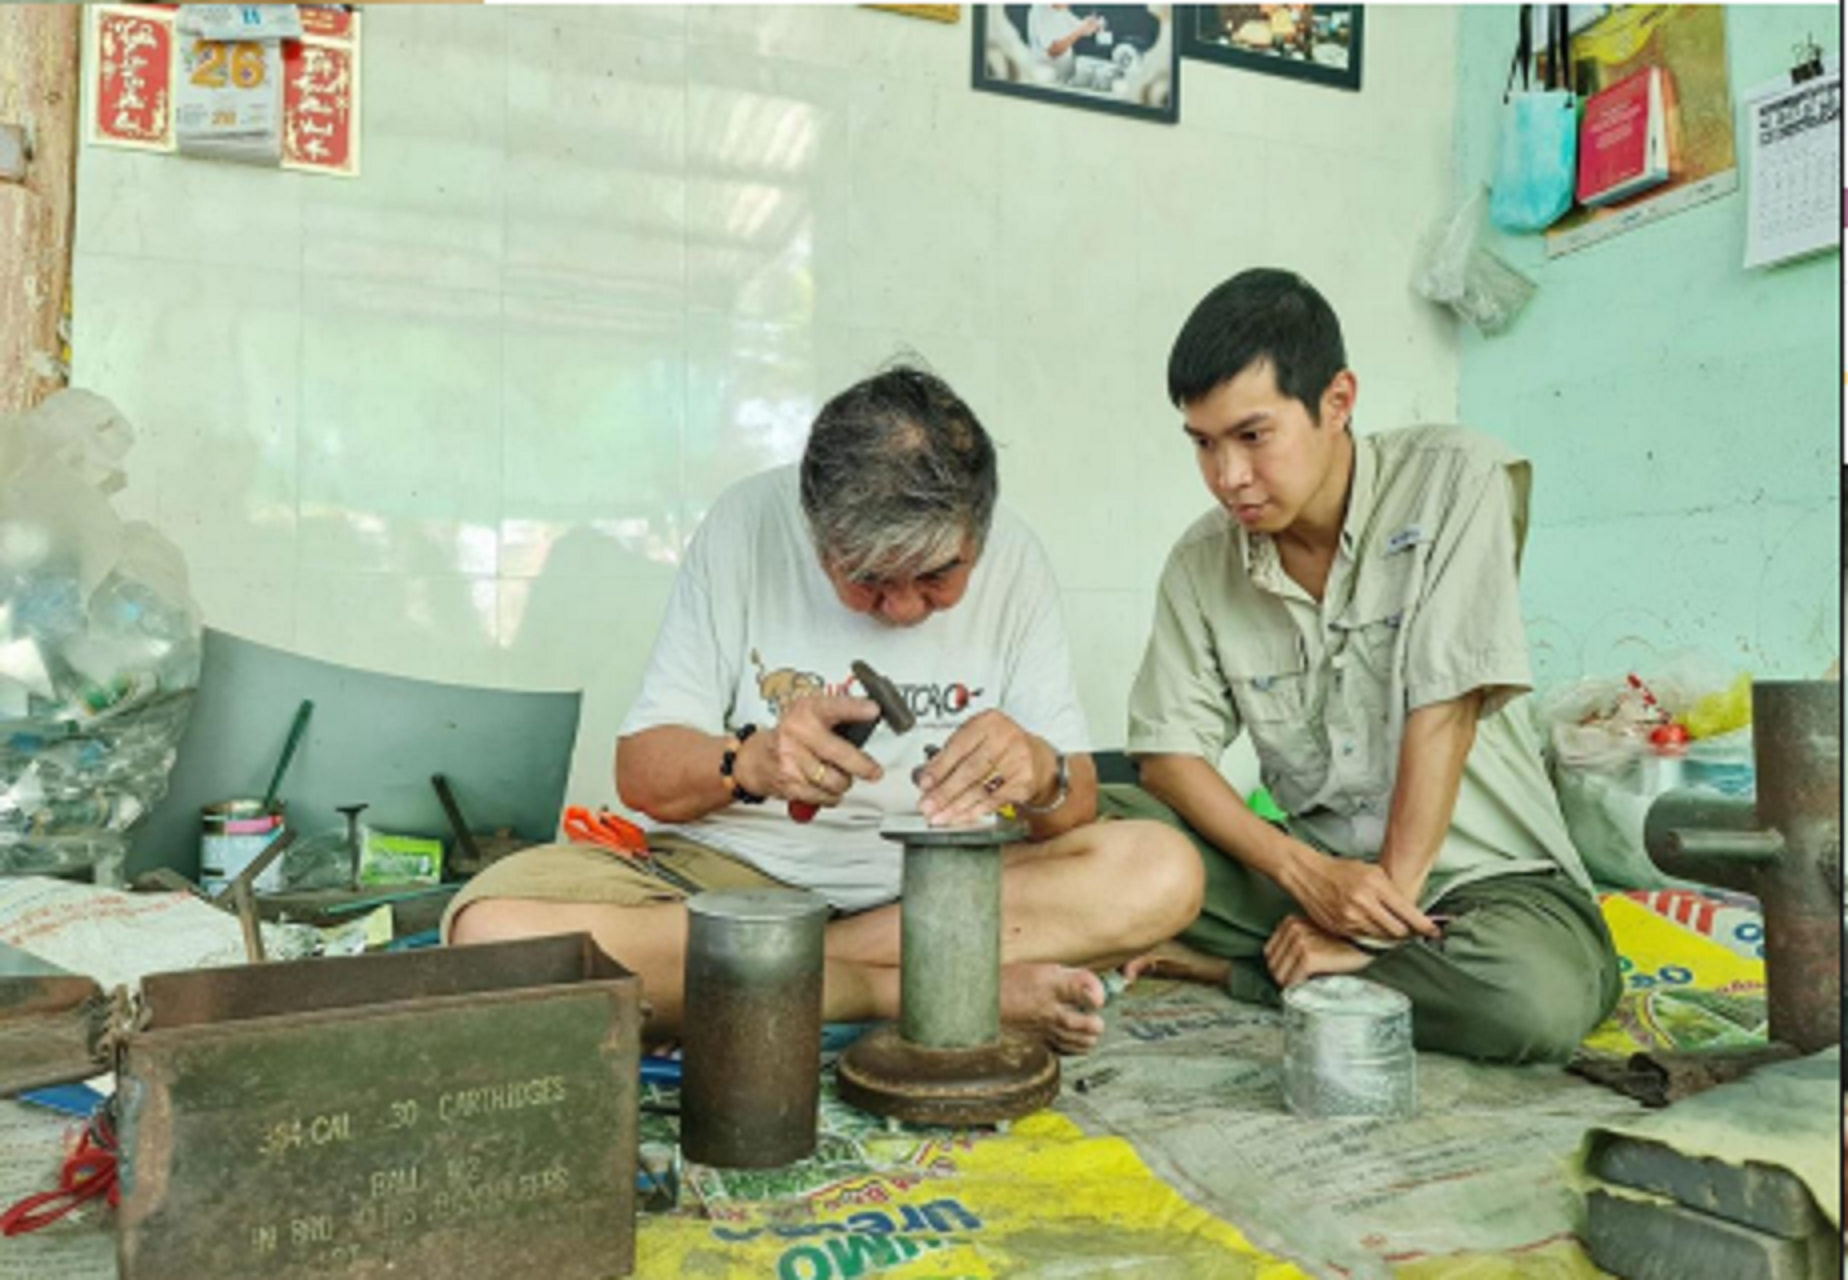 Restoring and Preserving the Knowledge of Making Metal Offering Tools of the Cham People 